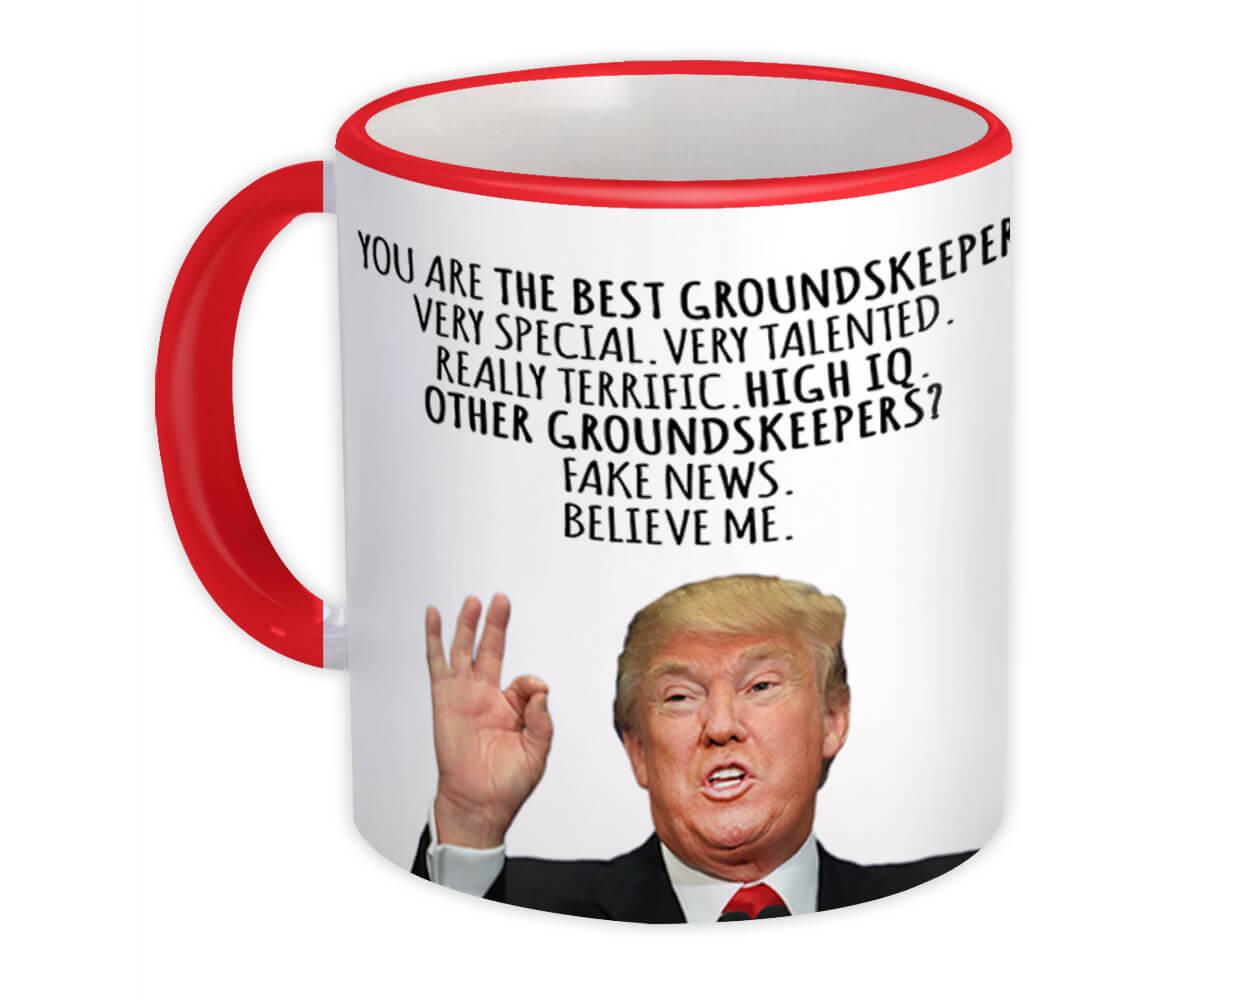 Details about   GROUNDSKEEPER Gift Funny Trump Mug Great Birthday Christmas Jobs 